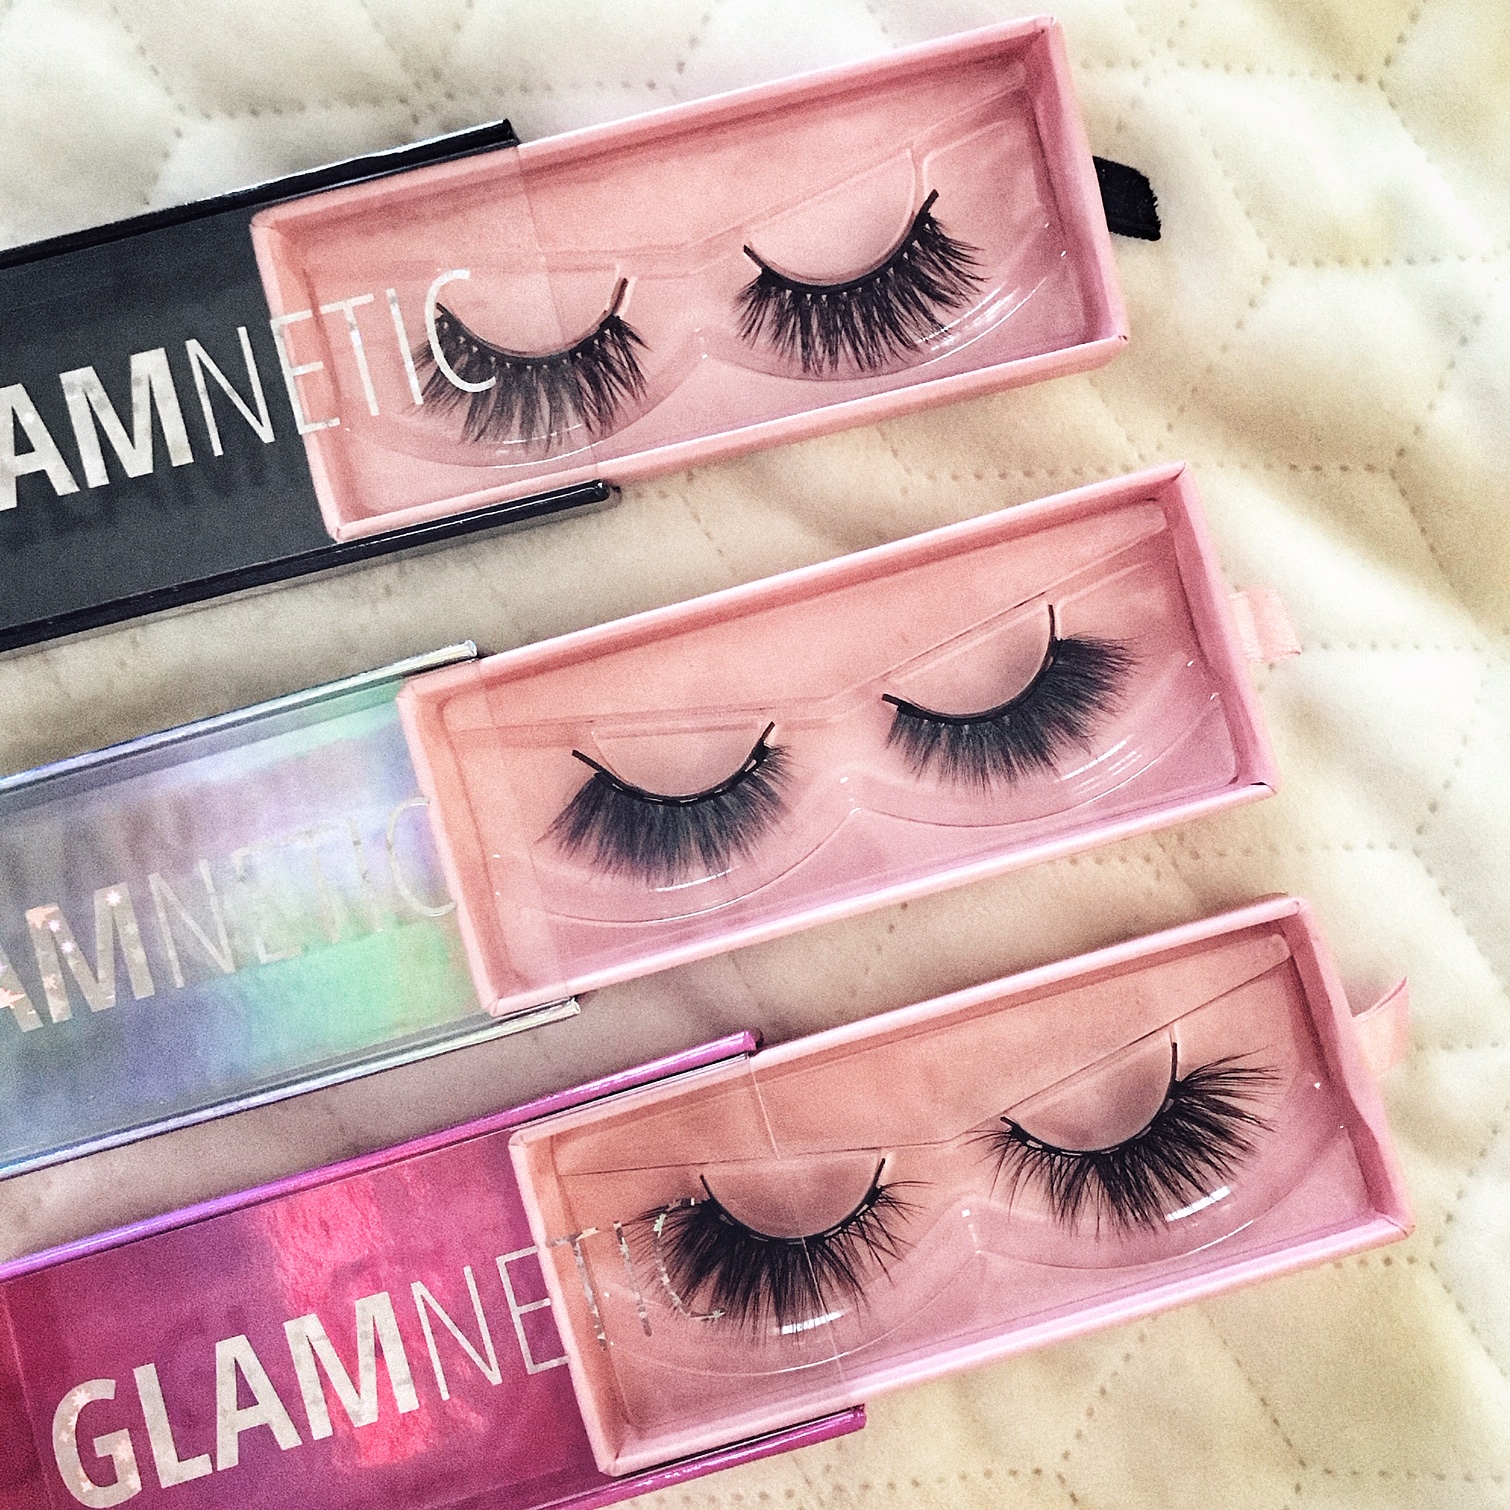 Glamnetic Eyeliner Review – Must Read This Before Buying Lashes